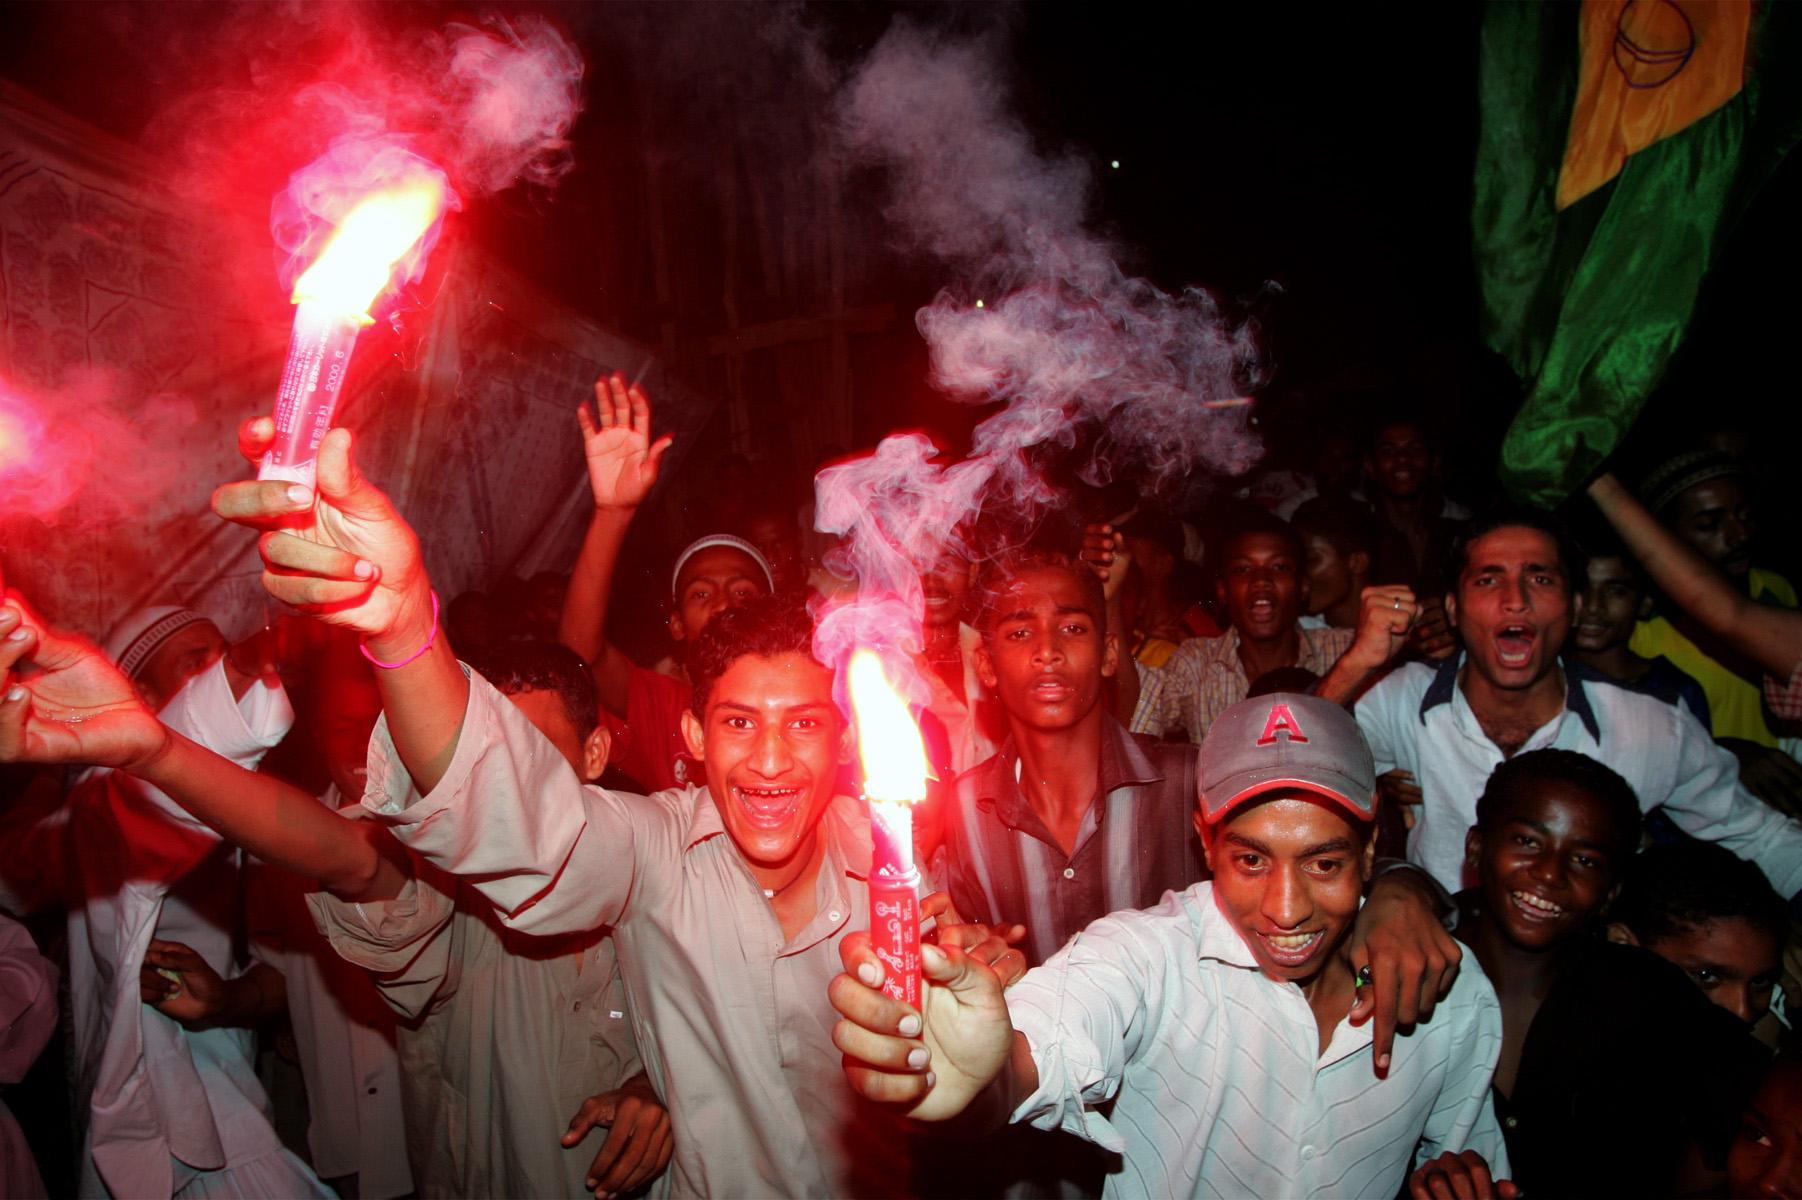 Pakistani soccer fans celebrate a Brazil victory in Lyari, one of the oldest and most densely populated parts of the city, plagued by street crime, drugs, and unemployment.